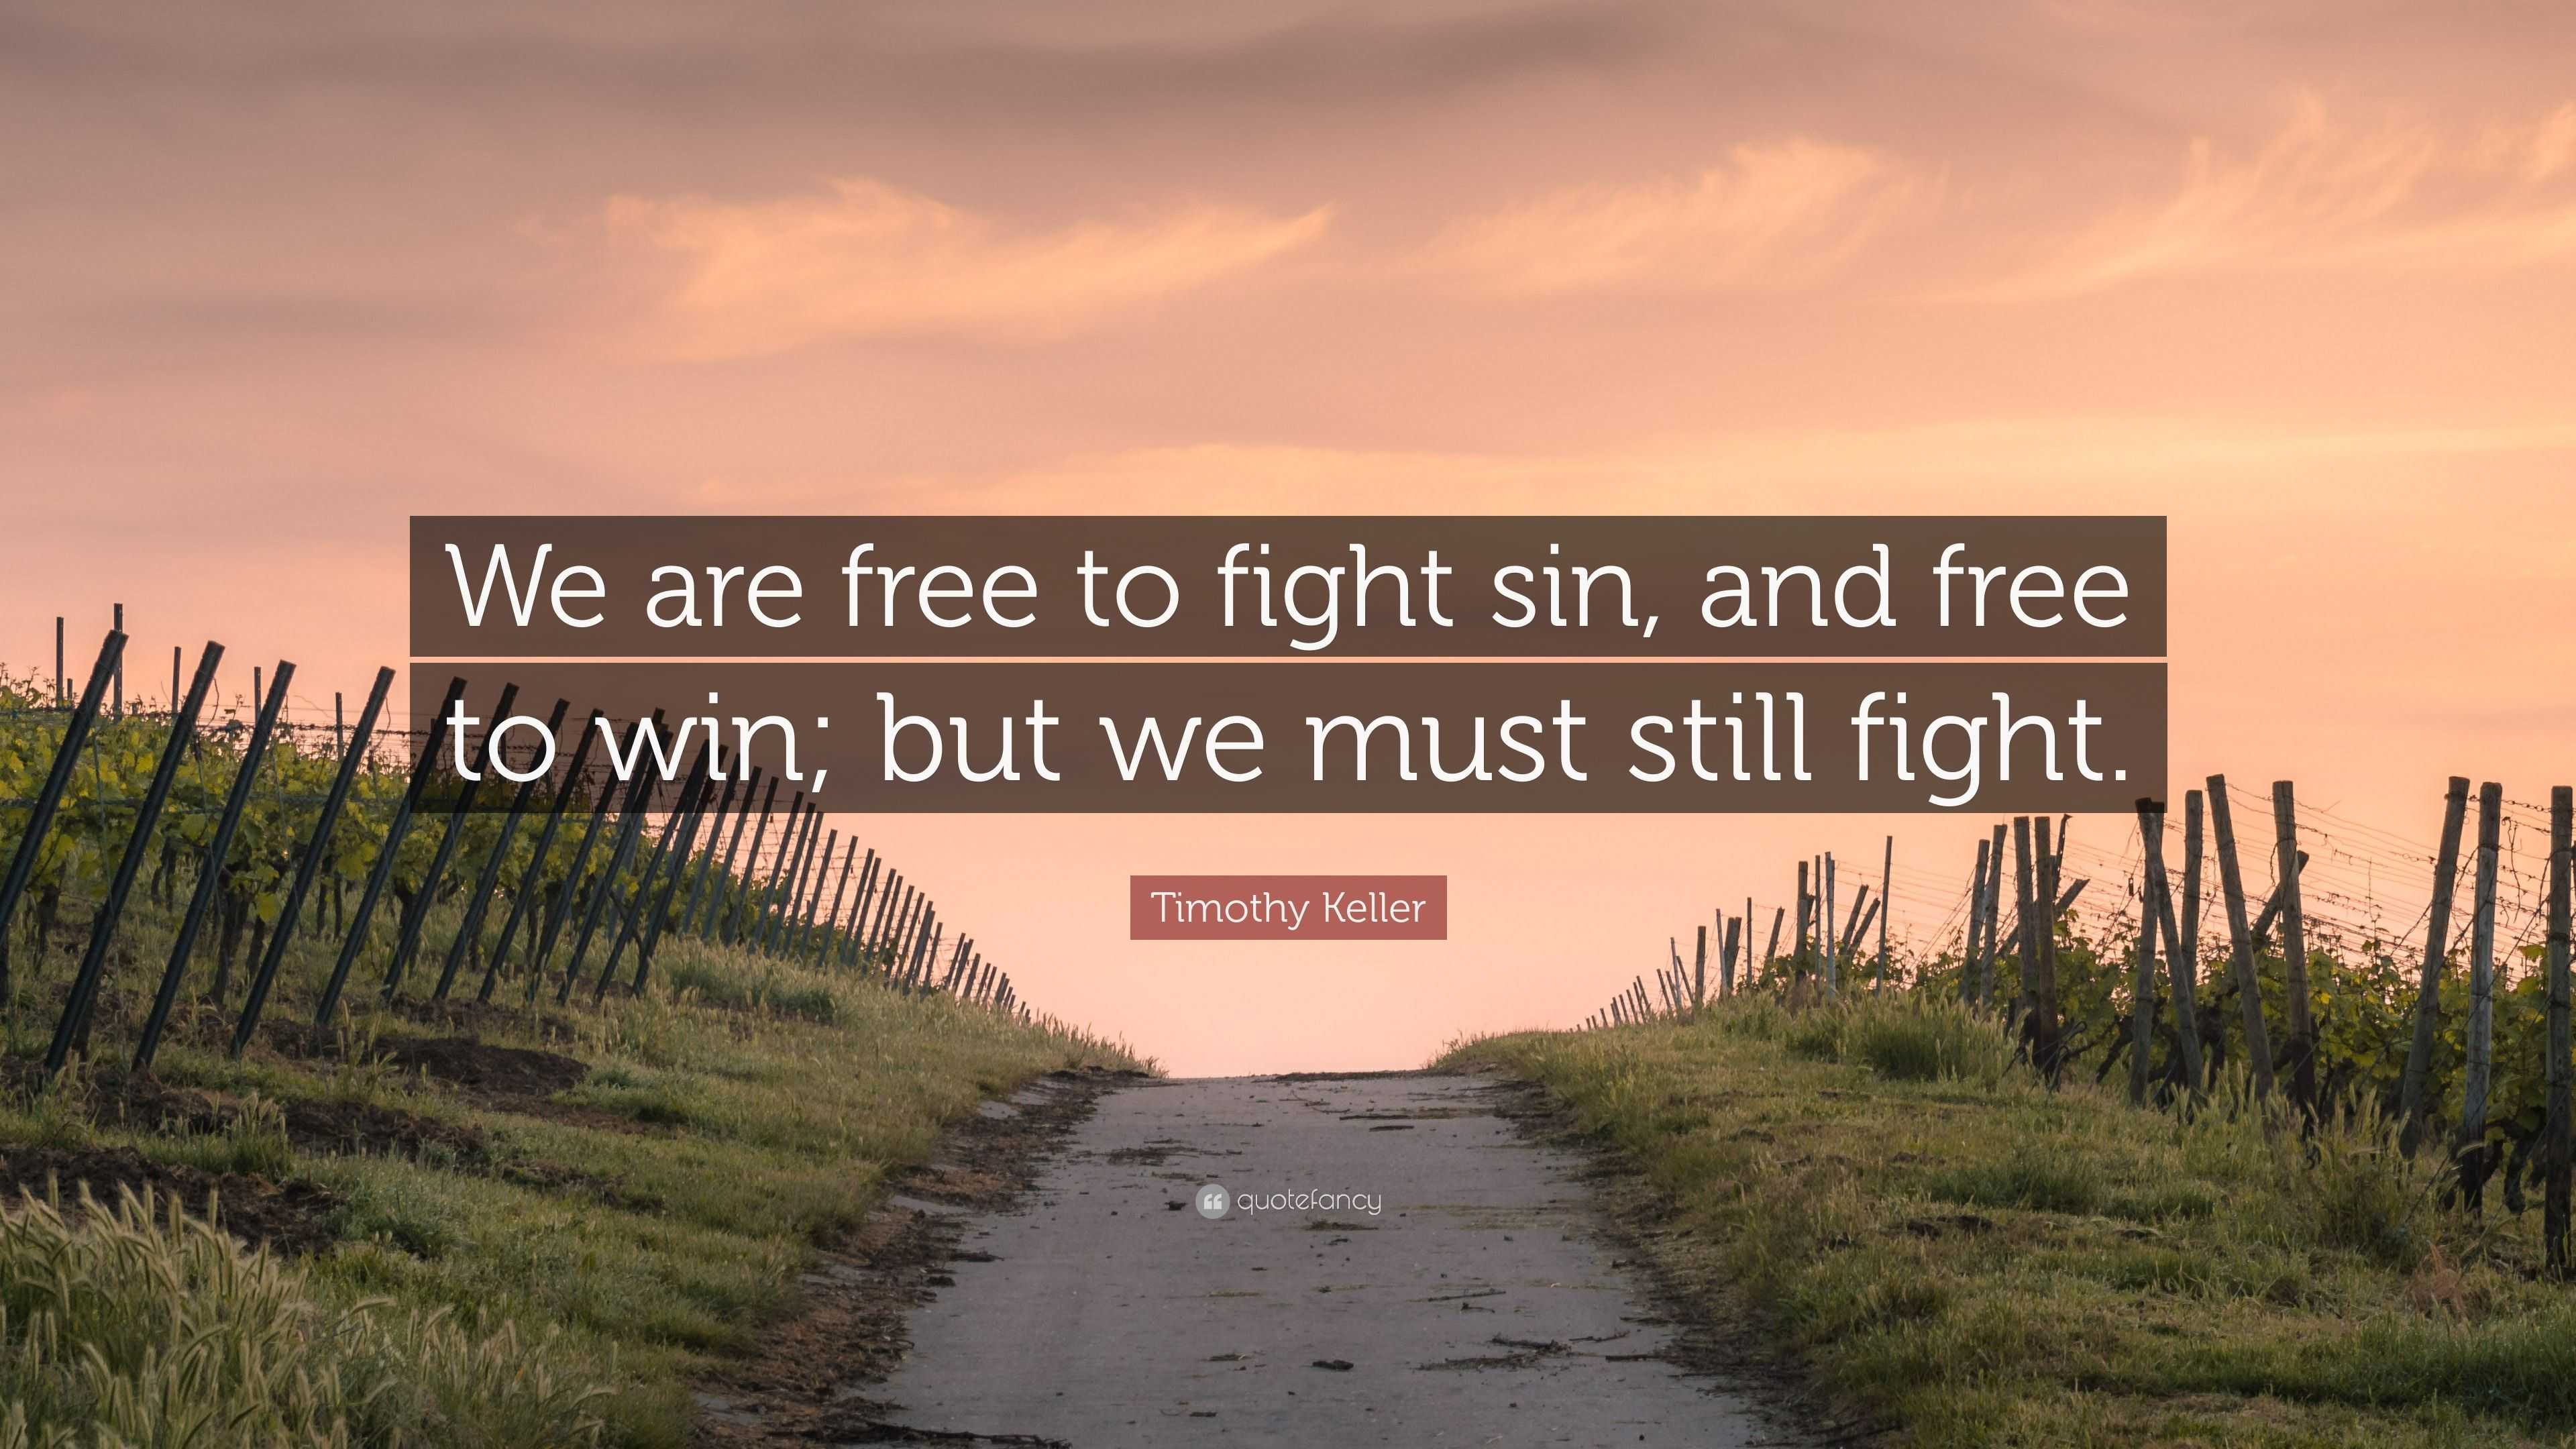 Timothy Keller Quote: “We are free to fight sin